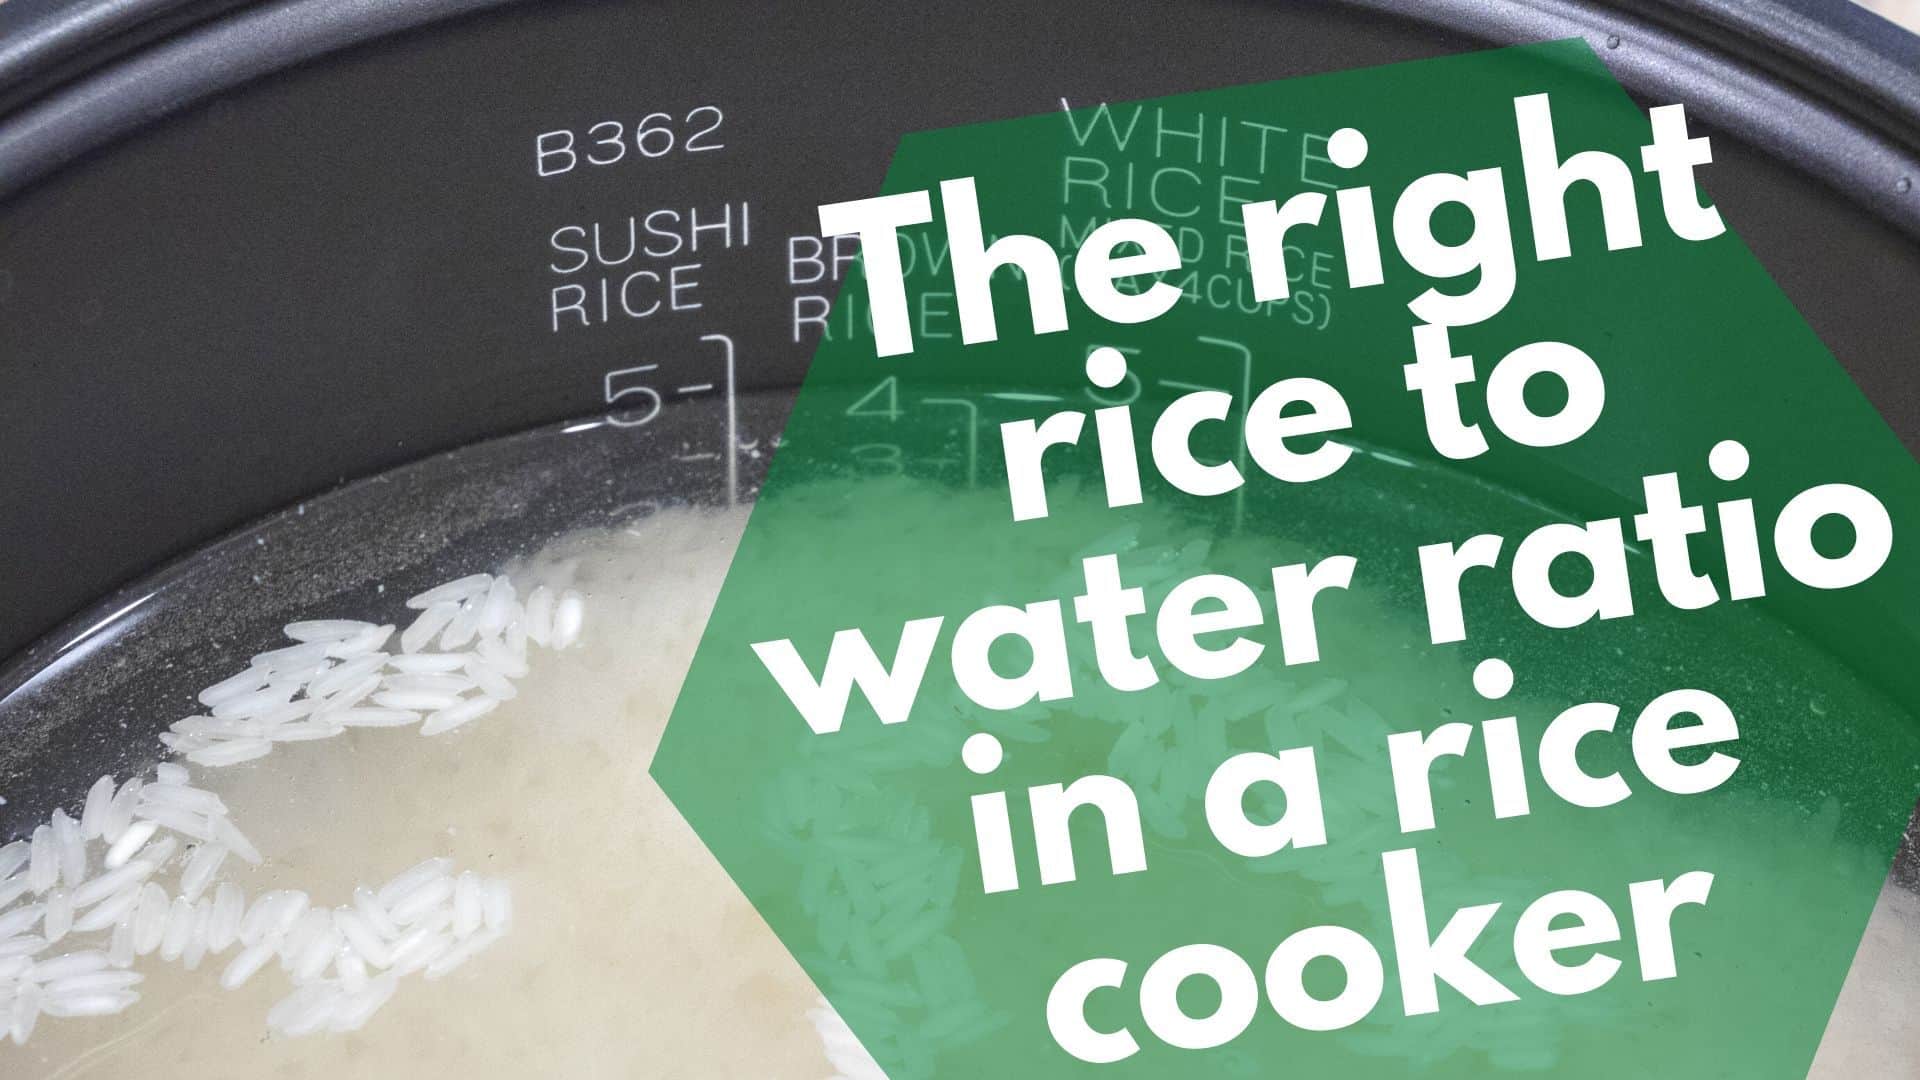 https://www.bitemybun.com/wp-content/uploads/2020/06/The-right-rice-to-water-ratio-in-a-rice-cooker.jpg